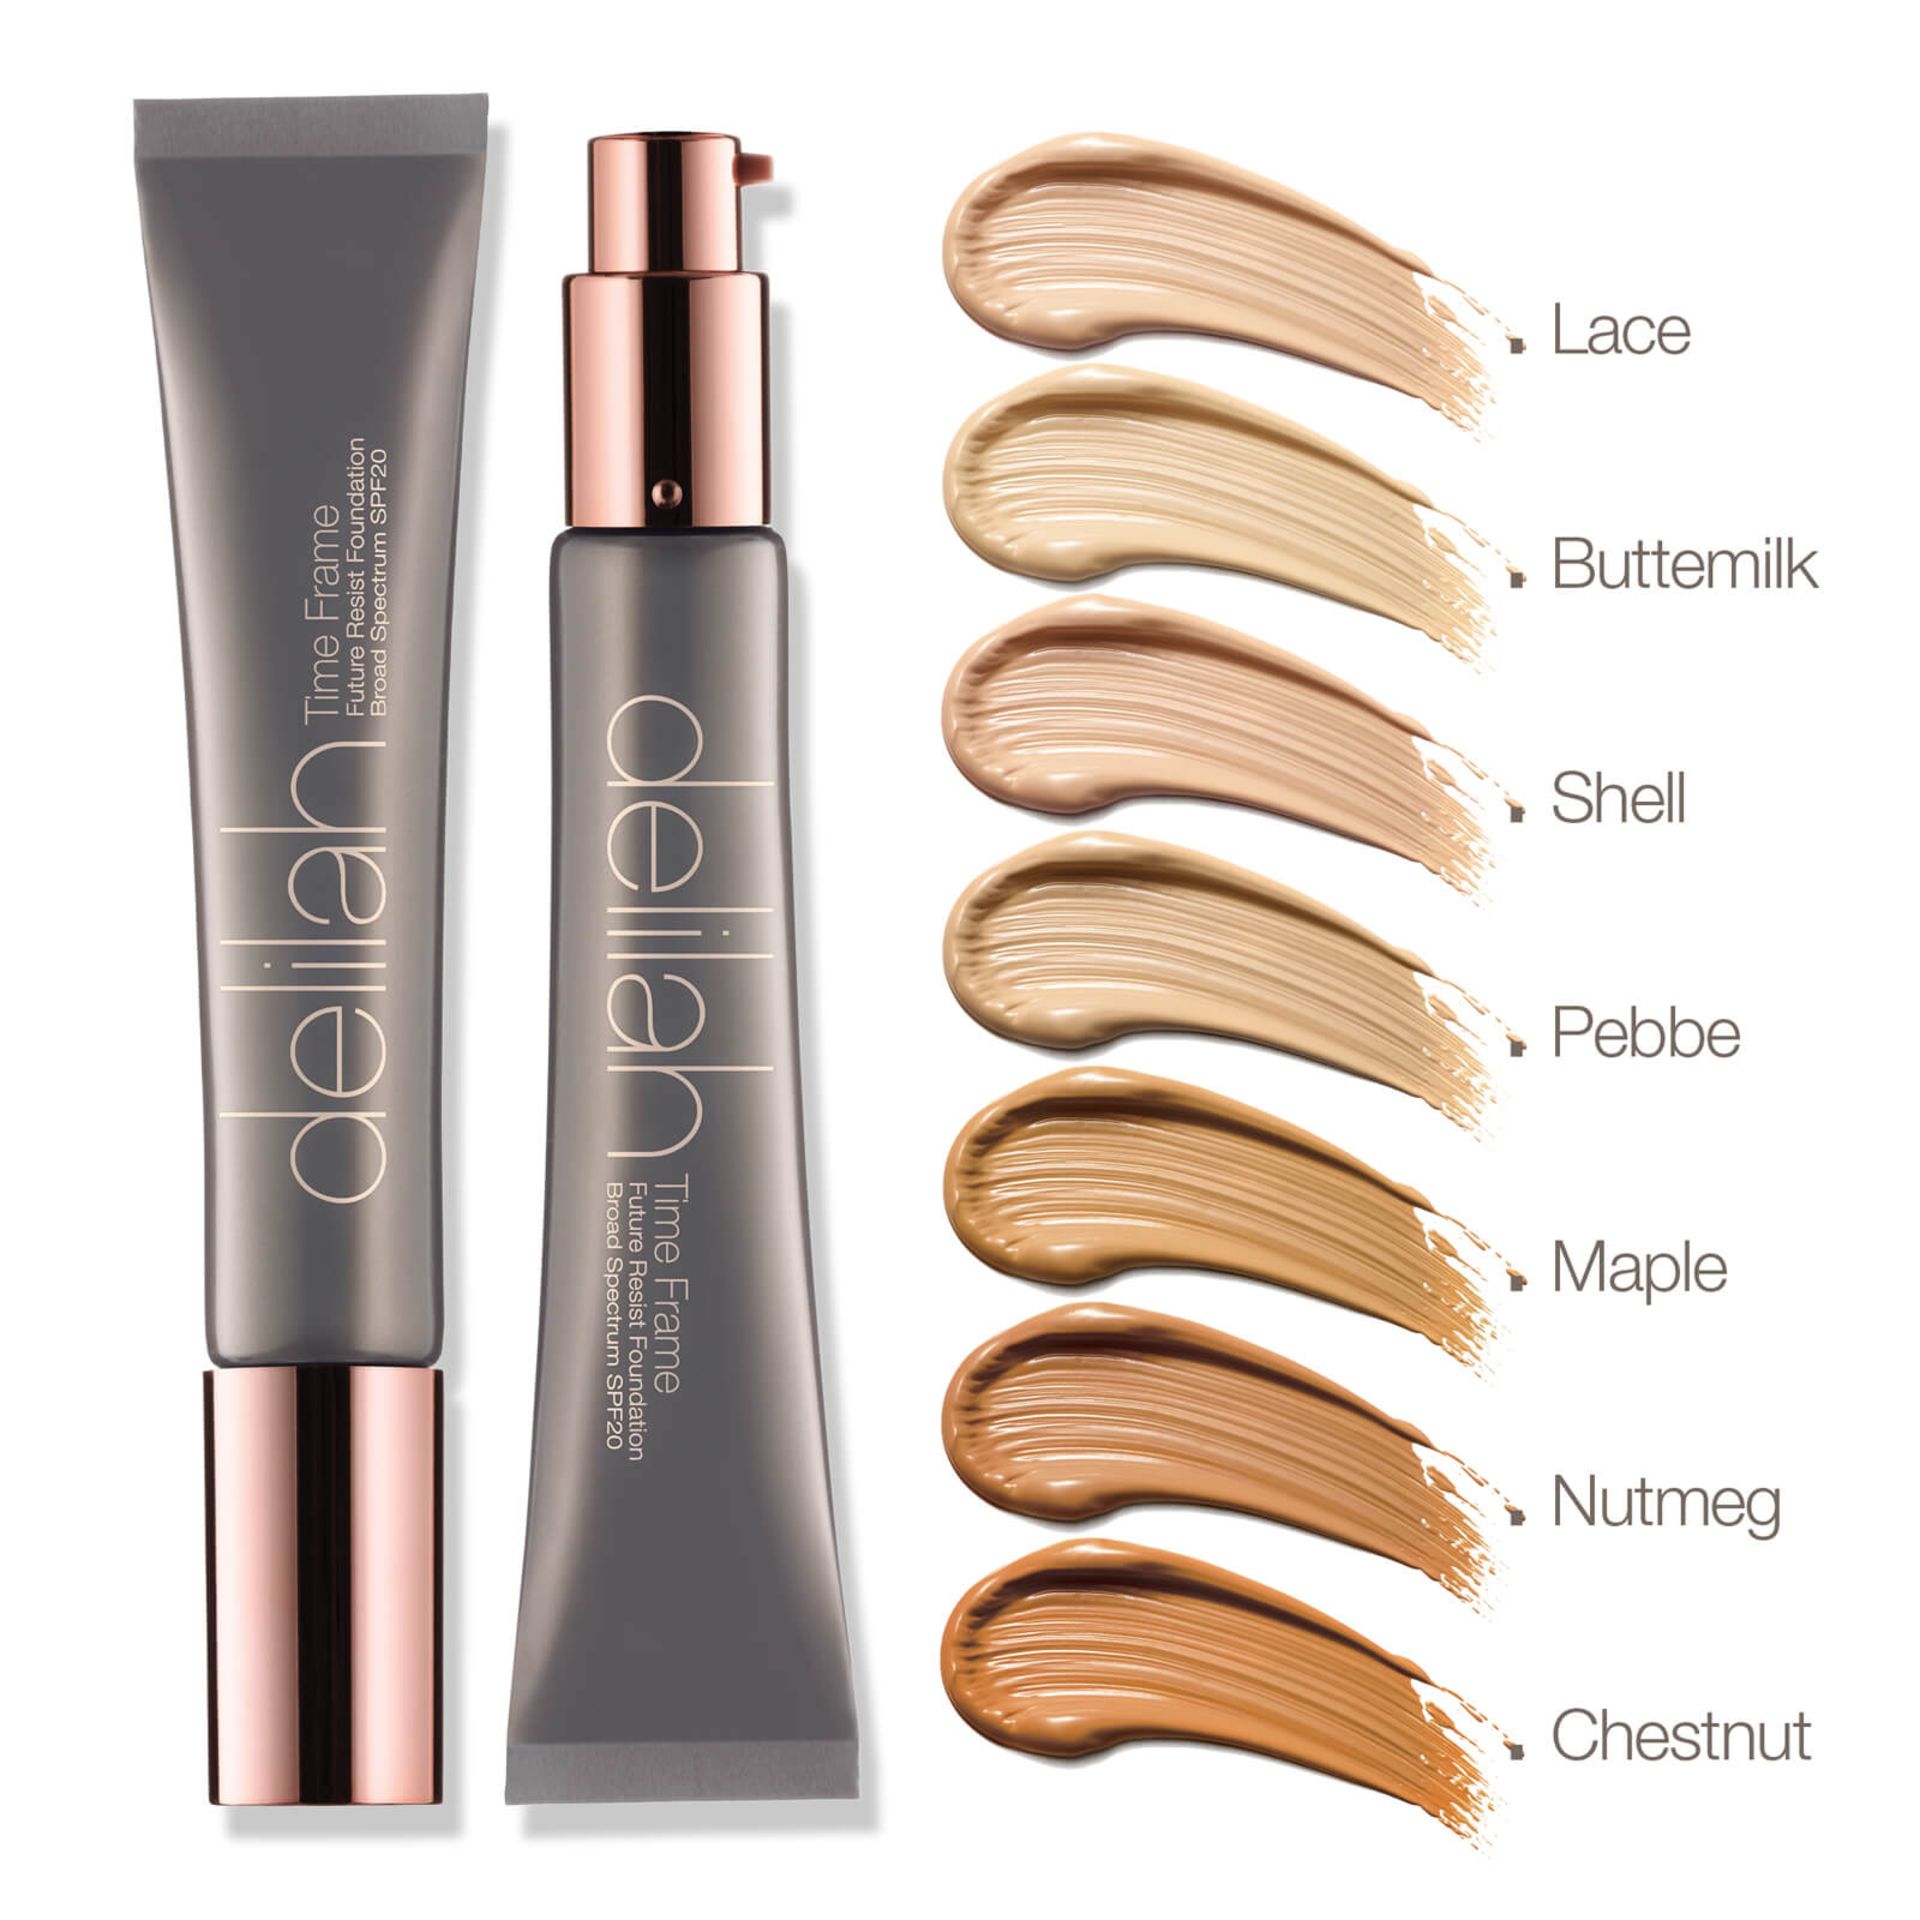 2 x Delilah Time Frame Future Resist Foundation Broad Spectrum SPF20 - Maple - RRP£68 - Image 3 of 3